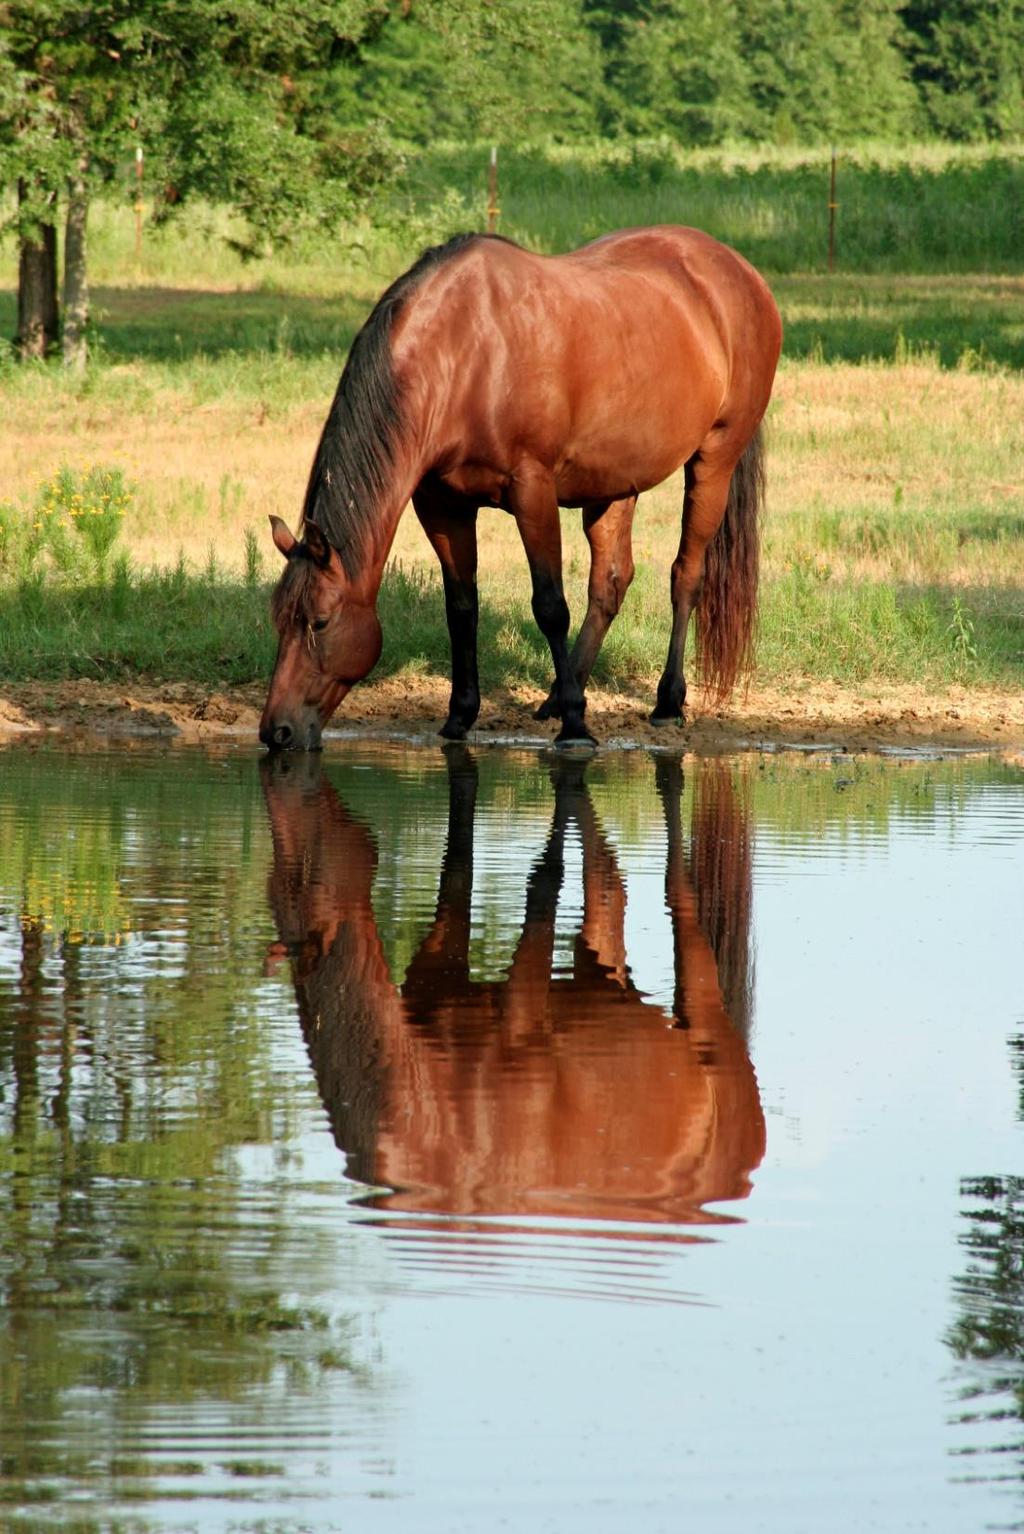 Basic Nutrients - Quiz 1 Why is water so important is a horse's diet?